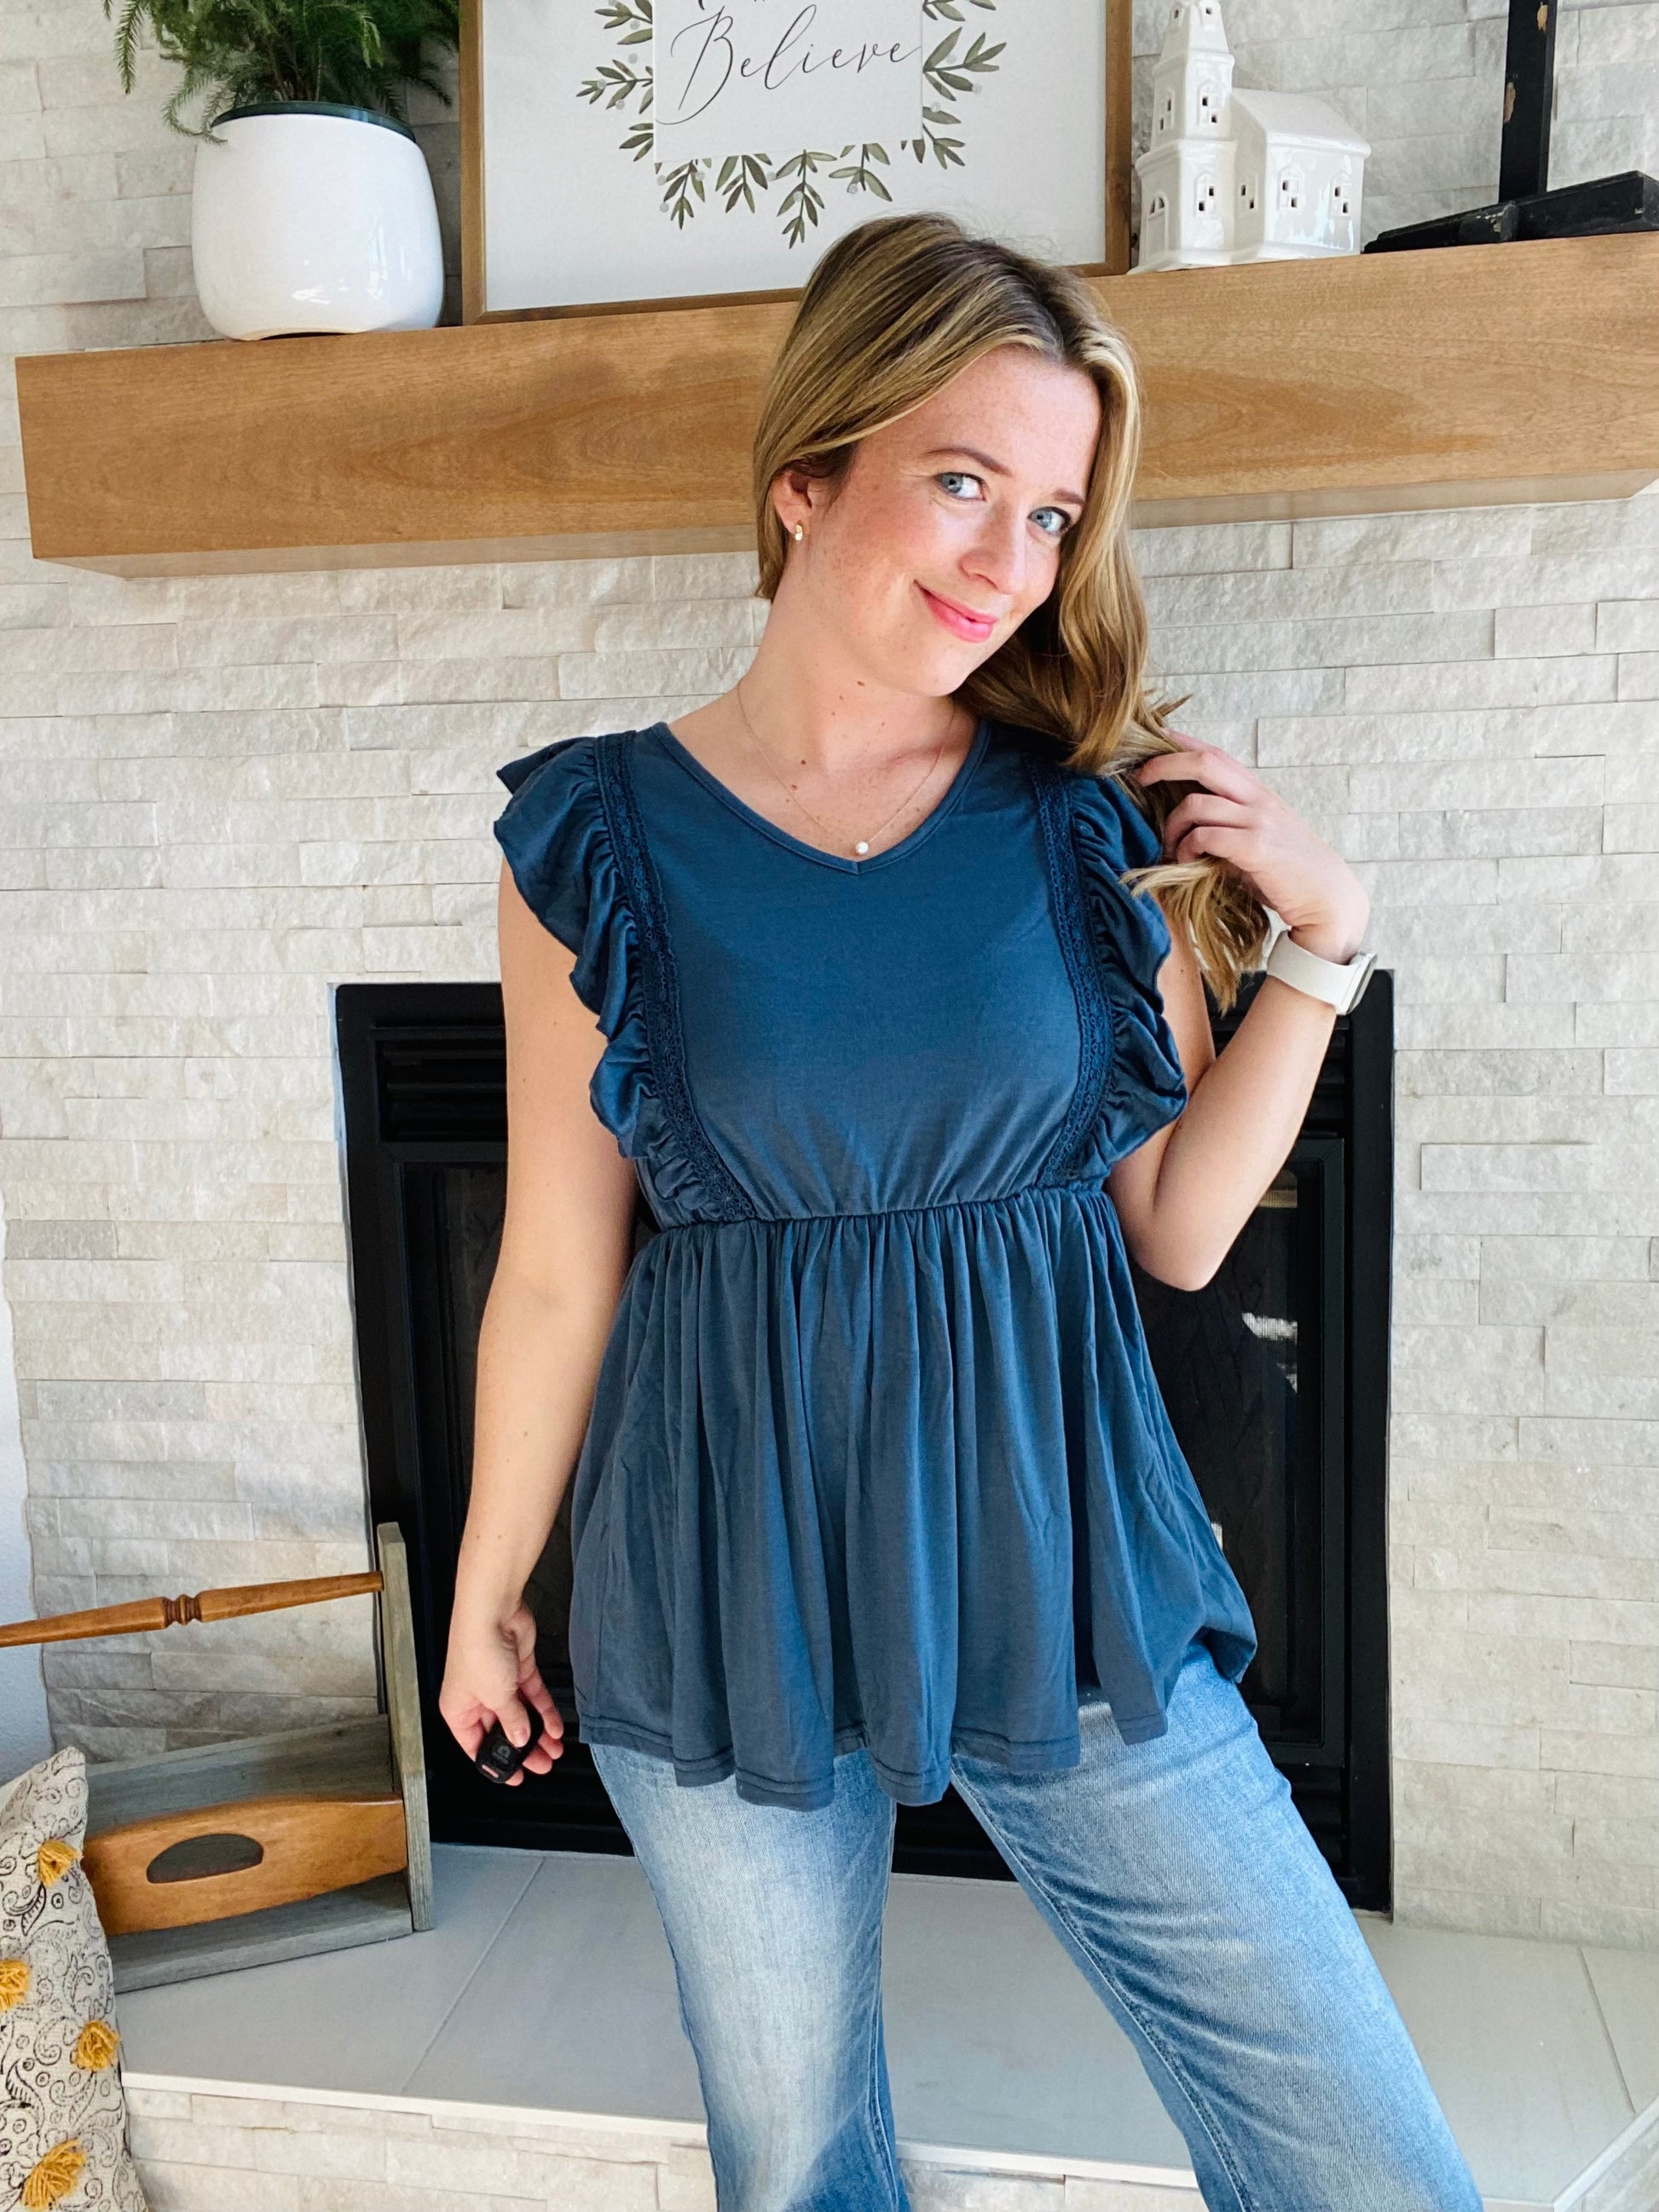 Look fashionable and feel confident wearing this navy ruched peplum tank top. The flattering silhouette is perfect for pairing with light or white denim. Flutter accents add a touch of femininity to the design. It's a great choice for any occasion.